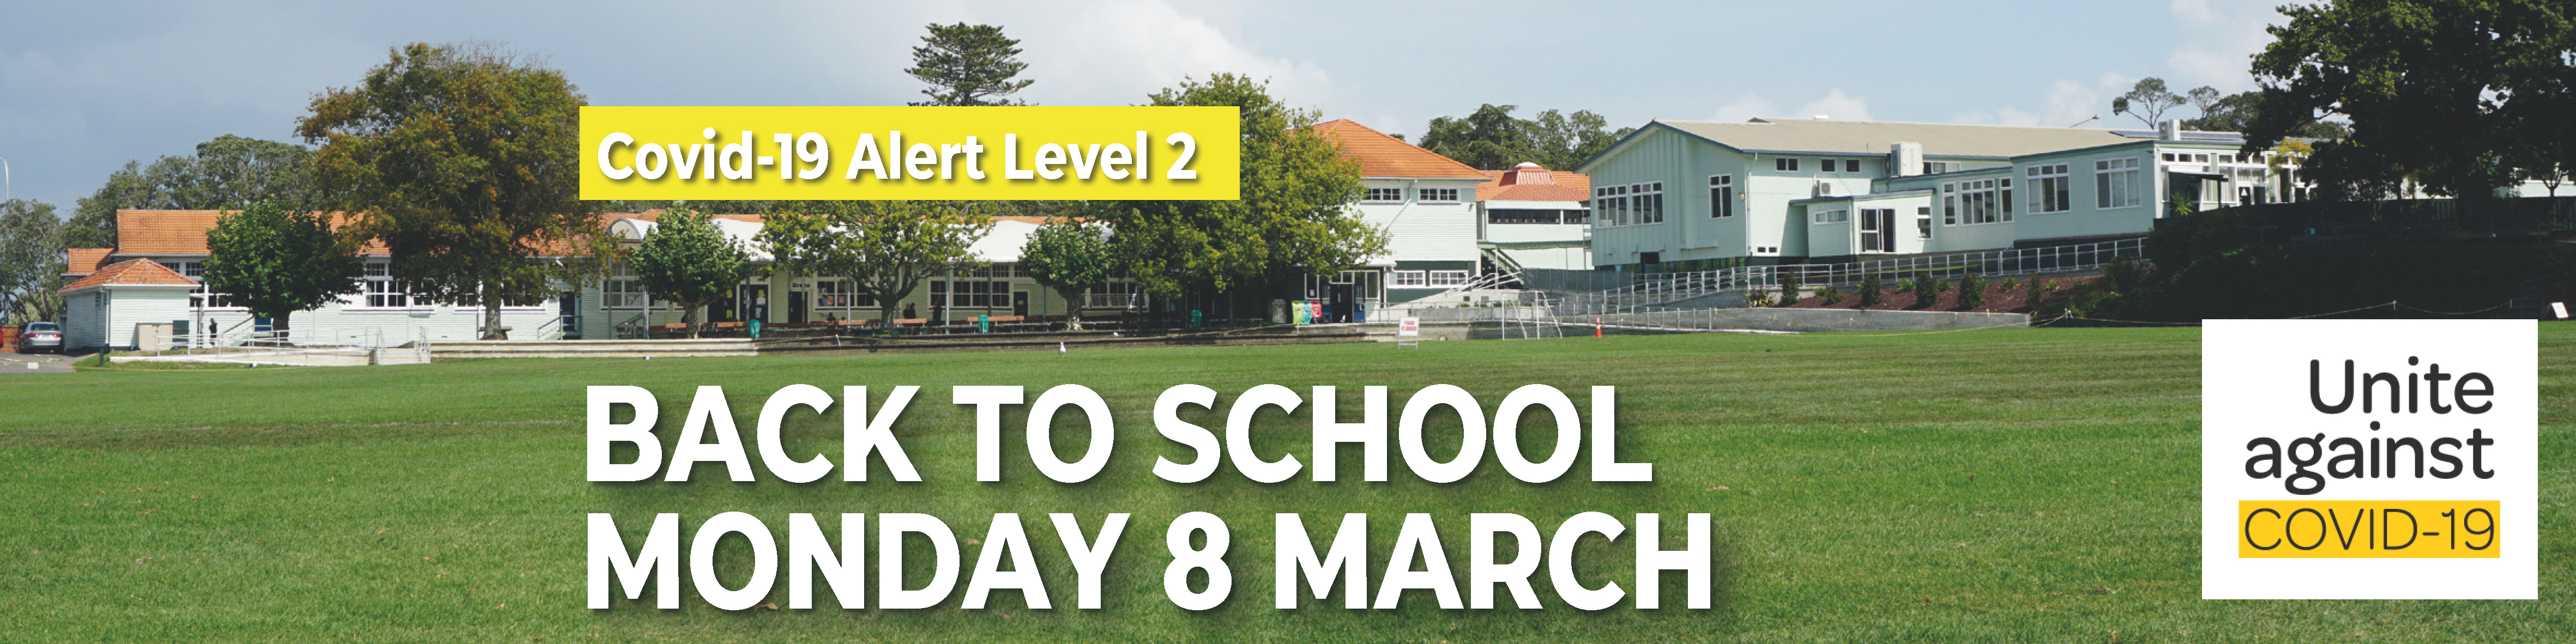 back to school 8 march 2021